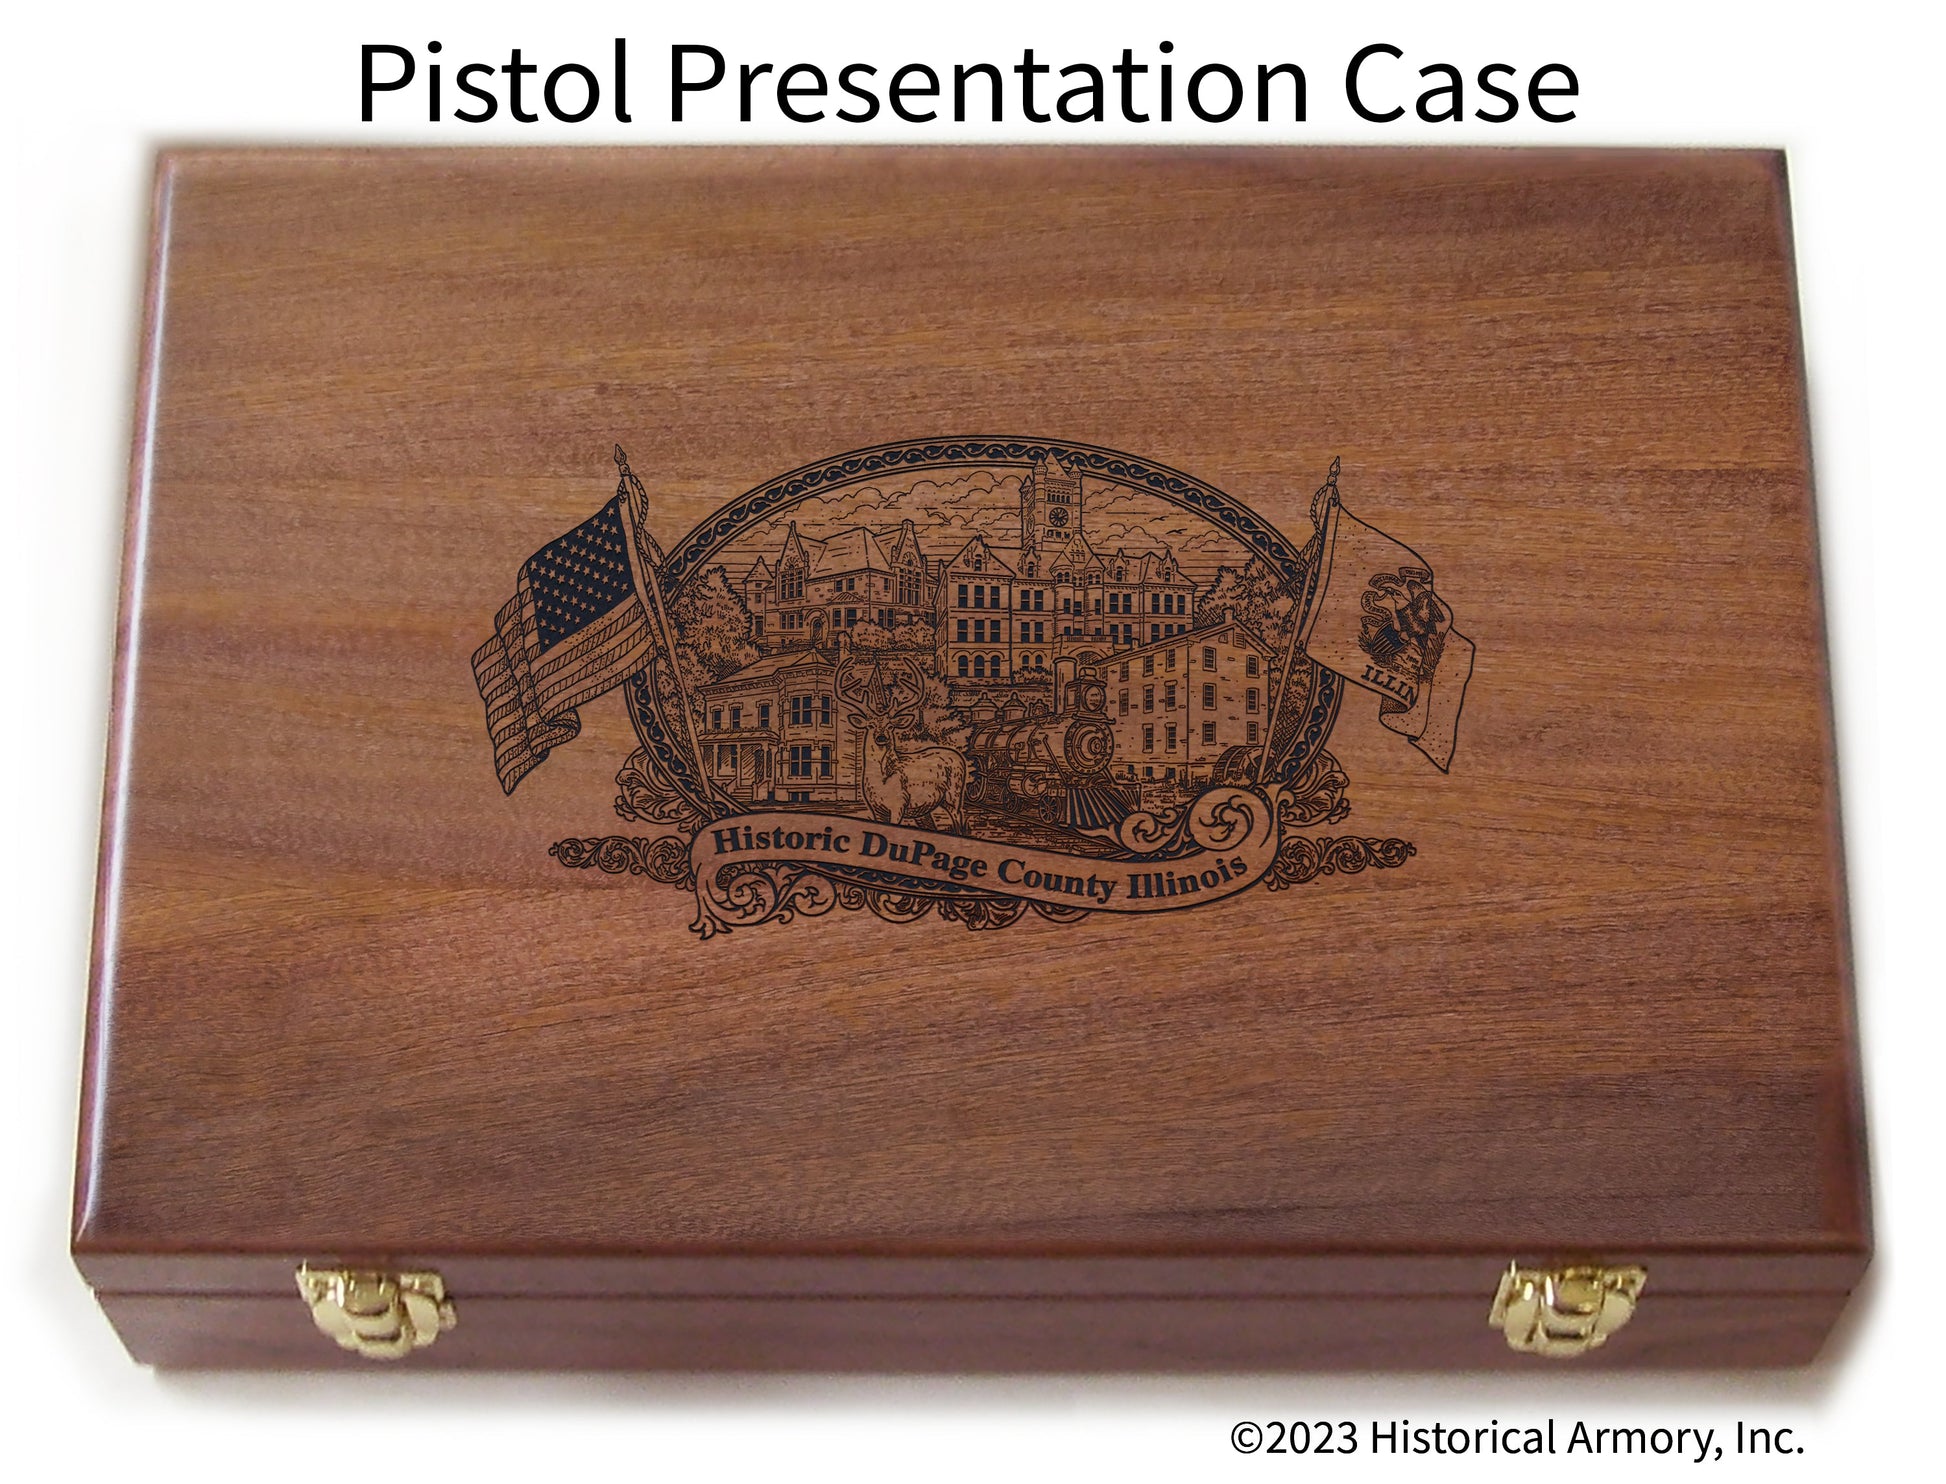 DuPage County Illinois Engraved .45 Auto Ruger 1911 Presentation Case